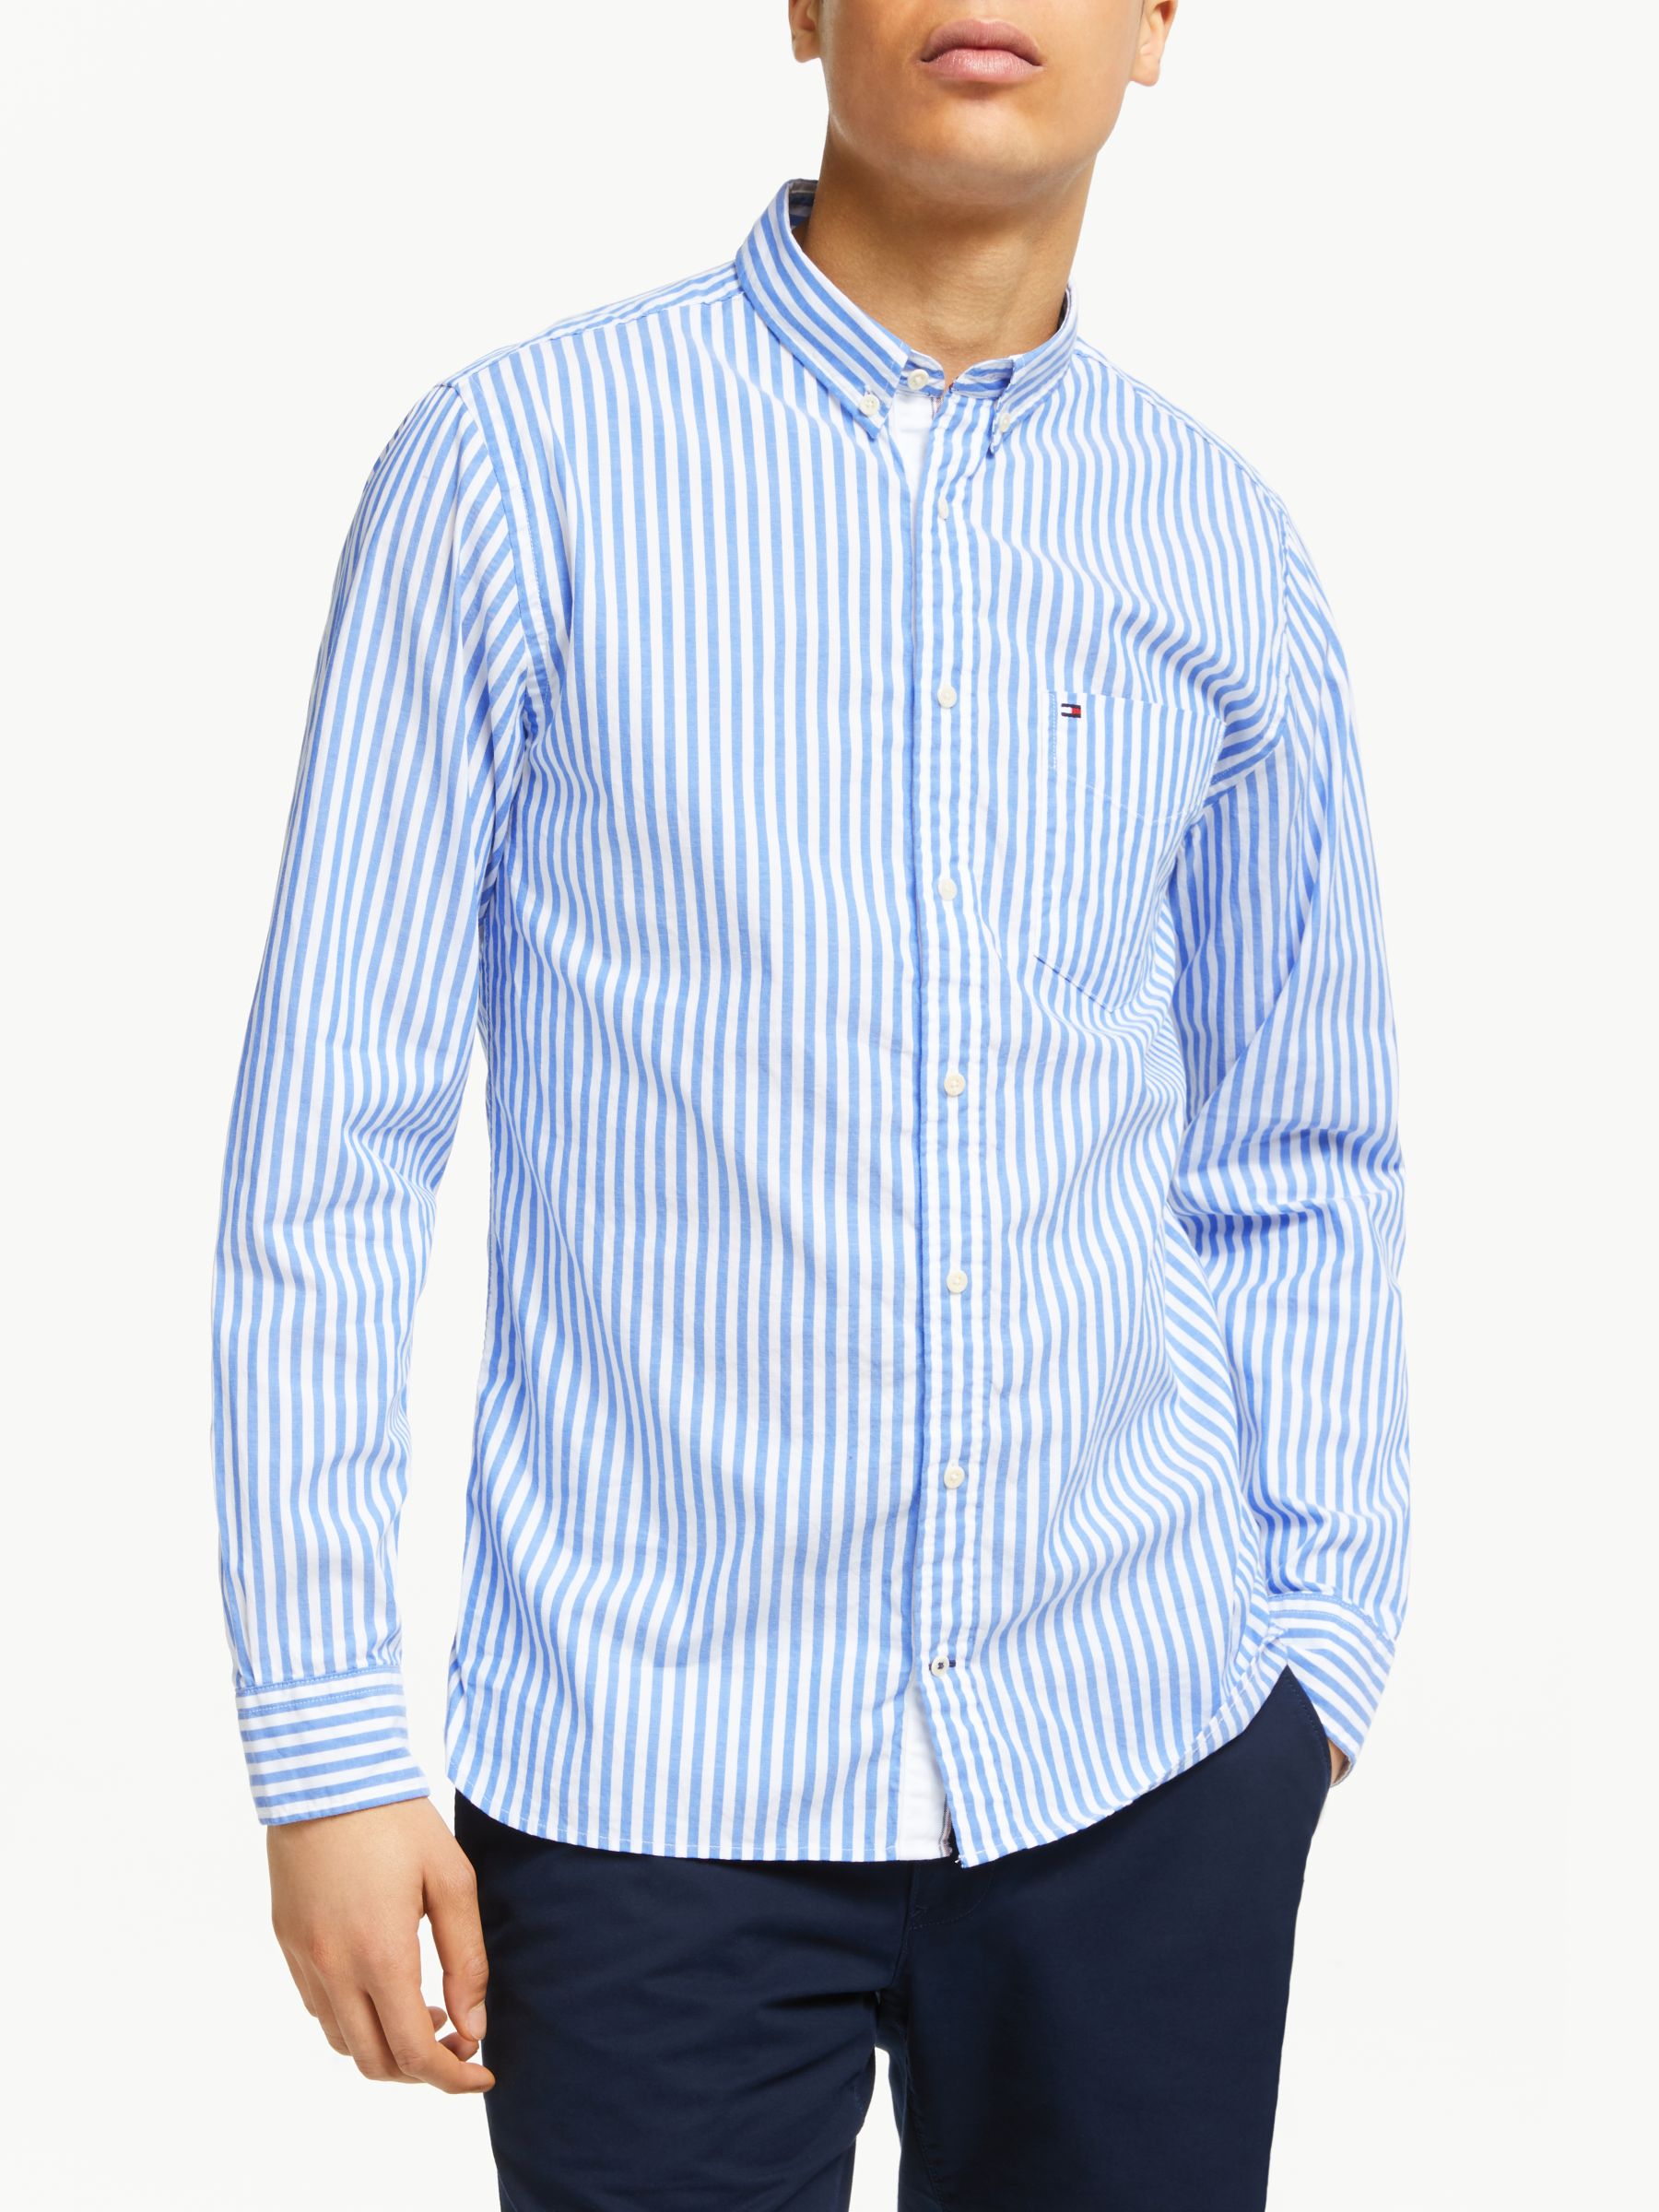 blue and white striped tommy hilfiger shirt